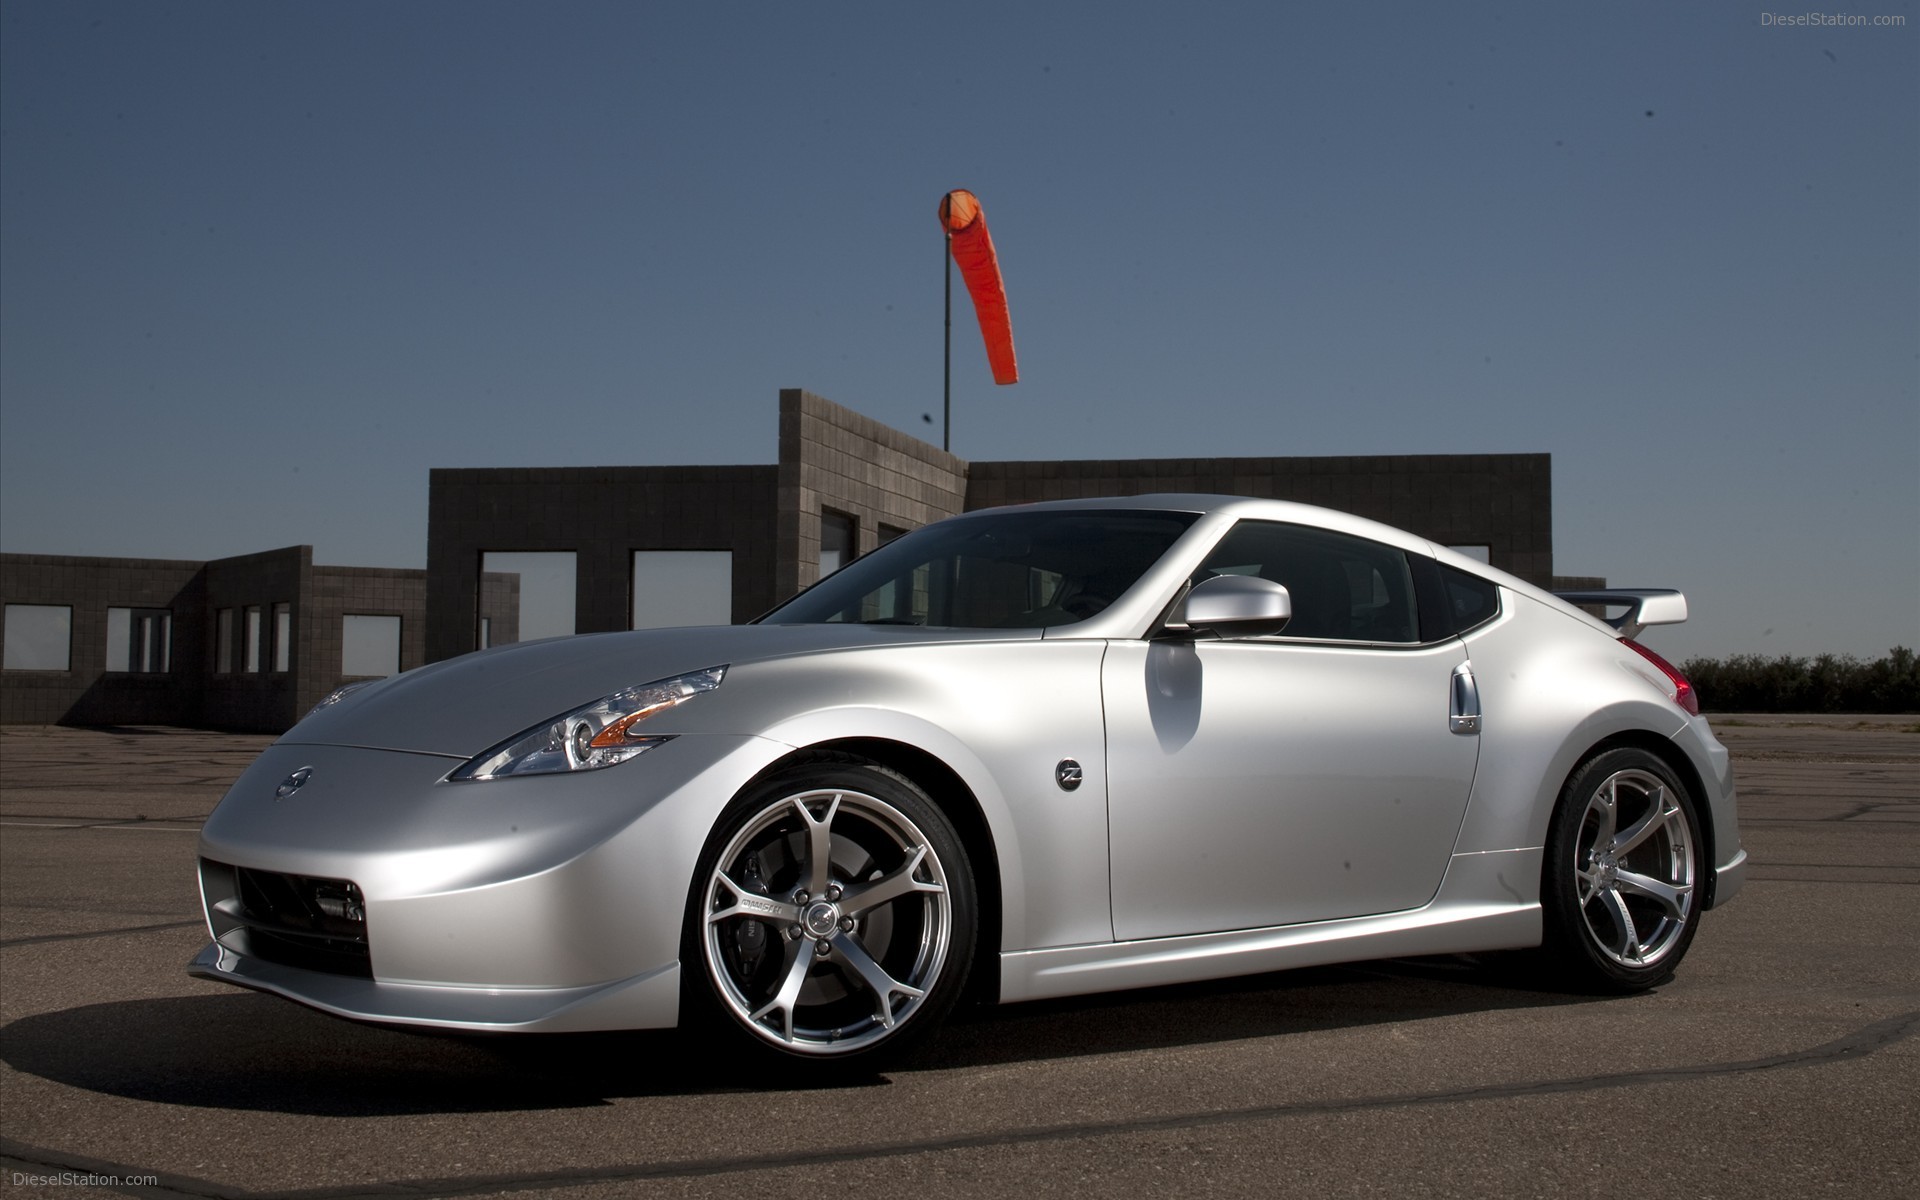 2009 Nismo Nissan 370Z Widescreen Exotic Car Wallpapers 14 of 34 1920x1200